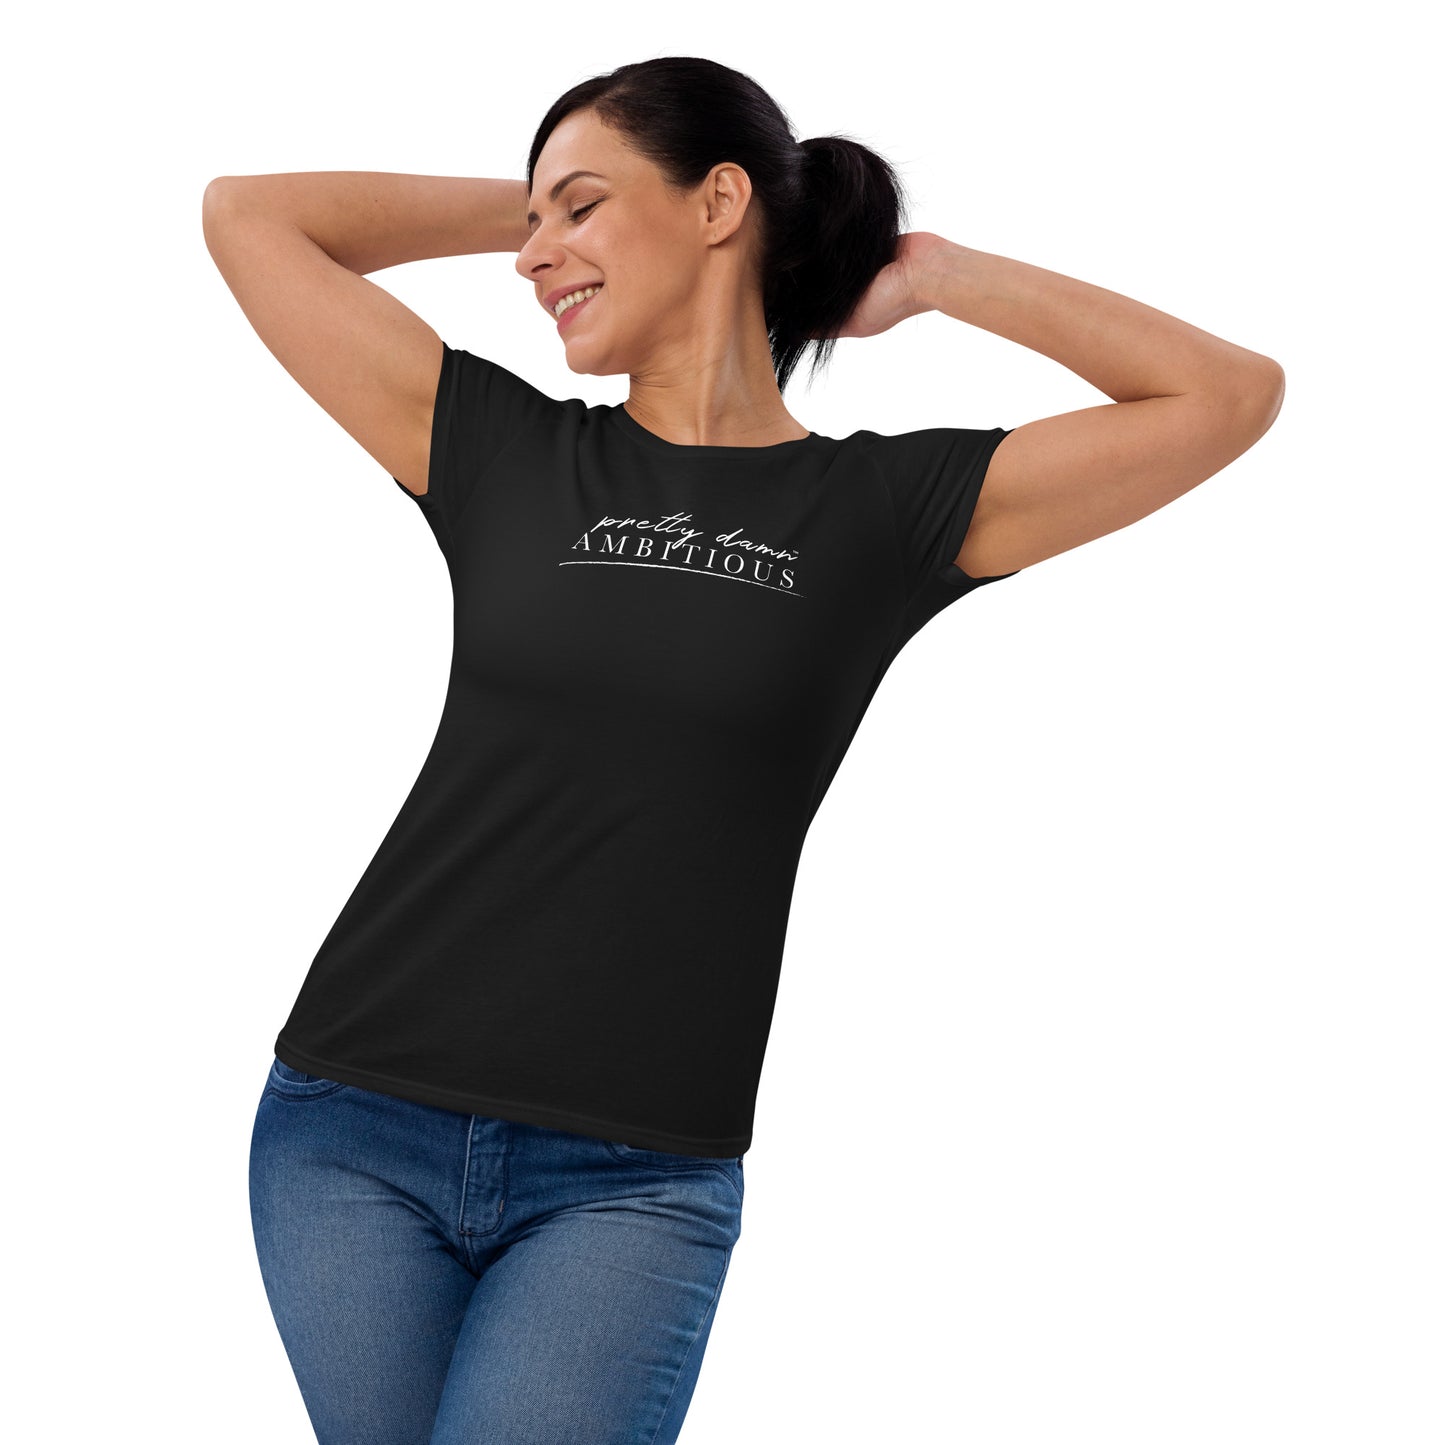 Pretty Damn Ambitious™ Midnight Collection - Form Fitting Women's Short Sleeve T-Shirt